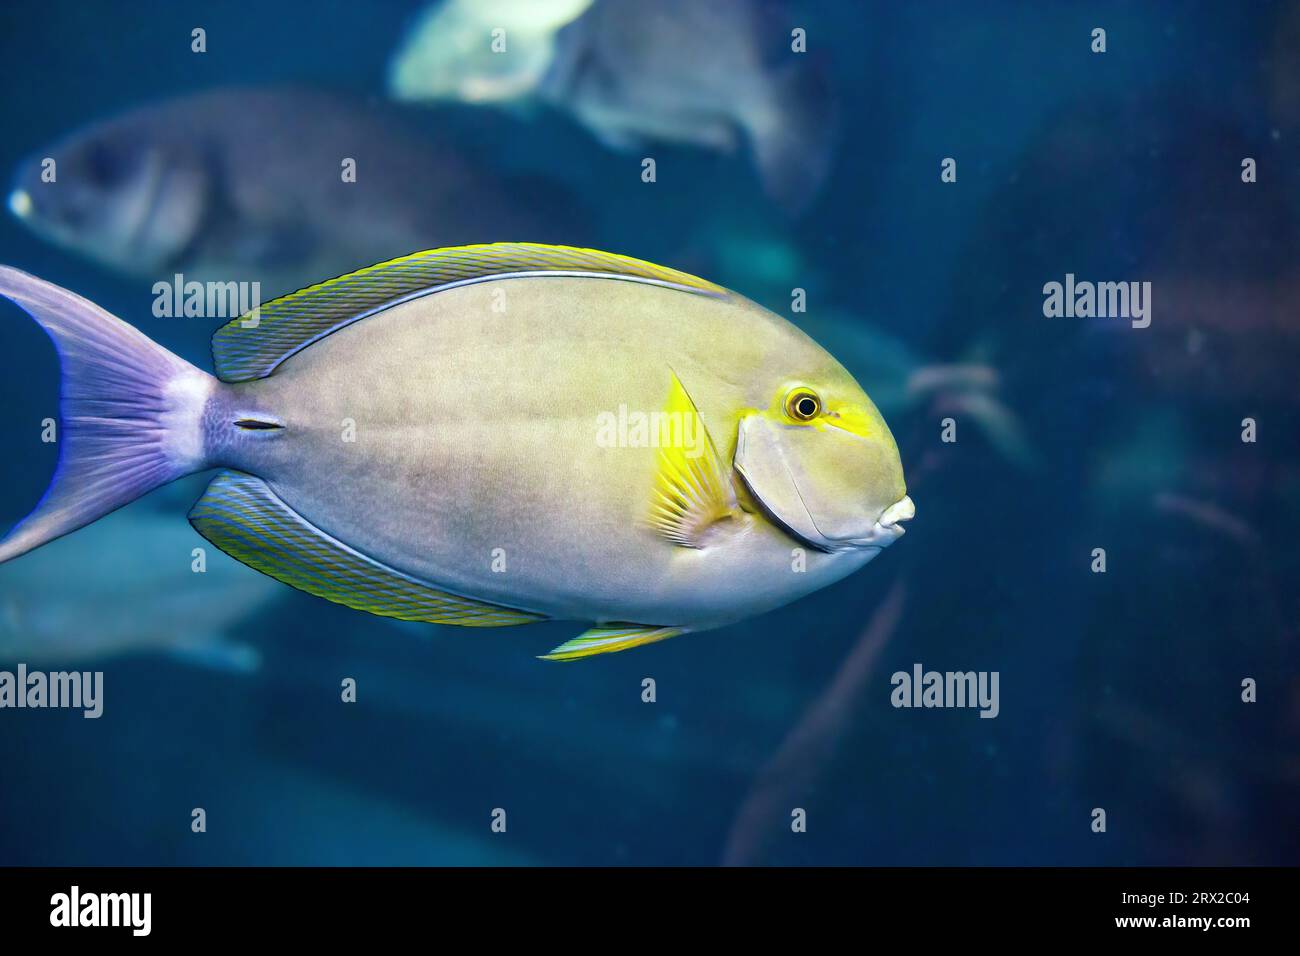 Yellowfin surgeonfish swimming in sea. Acanthurus xanthopterus fish swims in aquarium. Colorful Cuviers surgeon fish in deep ocean, side view Stock Photo